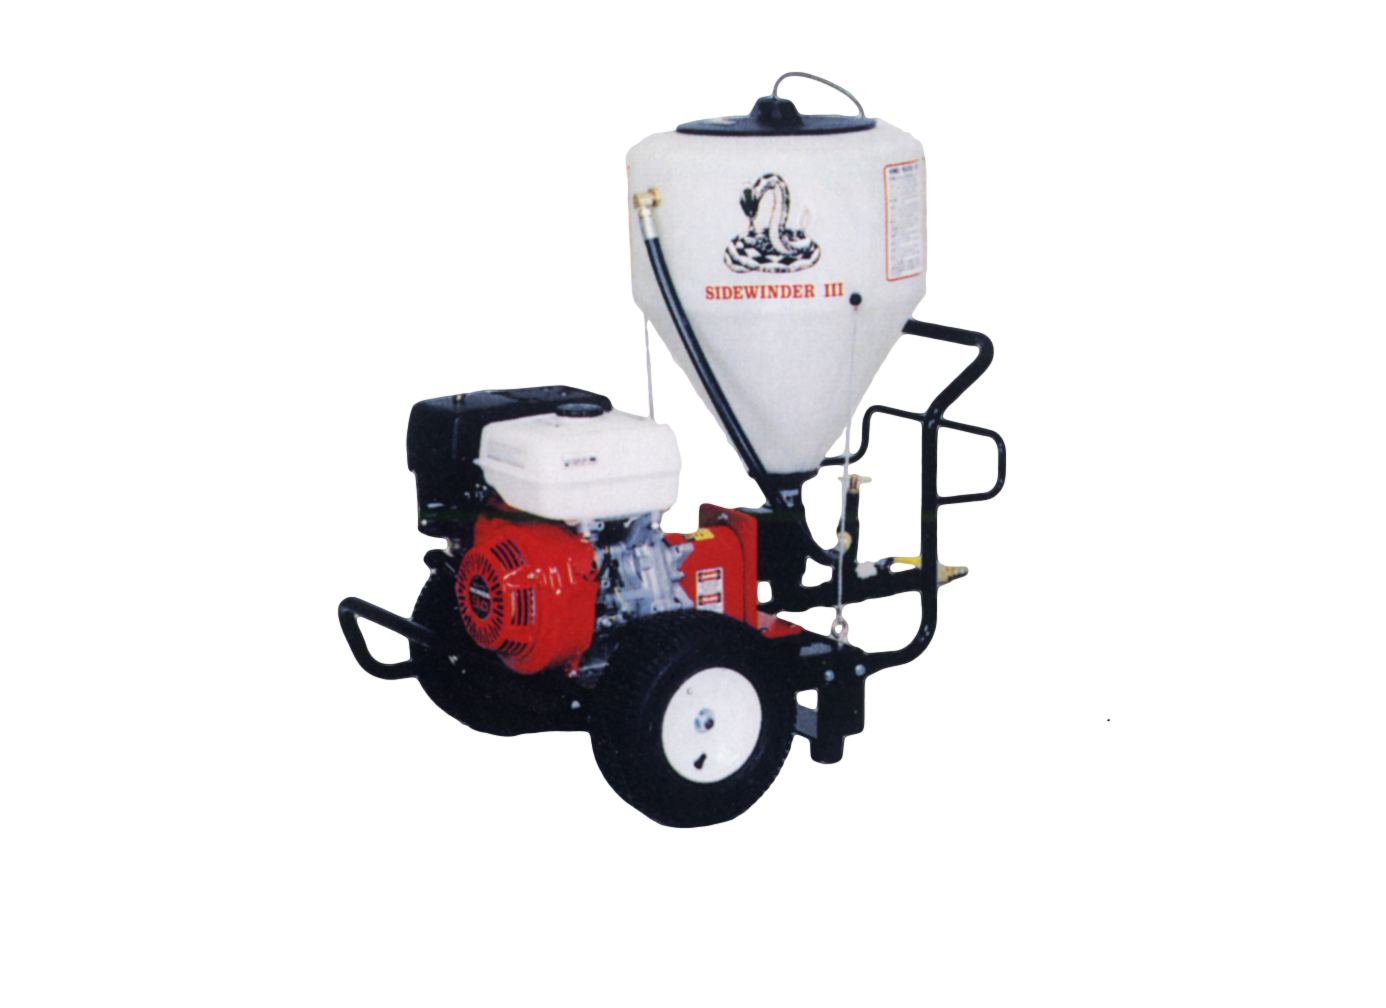 The Sidewinder III Paint Stripper and Chemical Sprayer by Restoration Direct